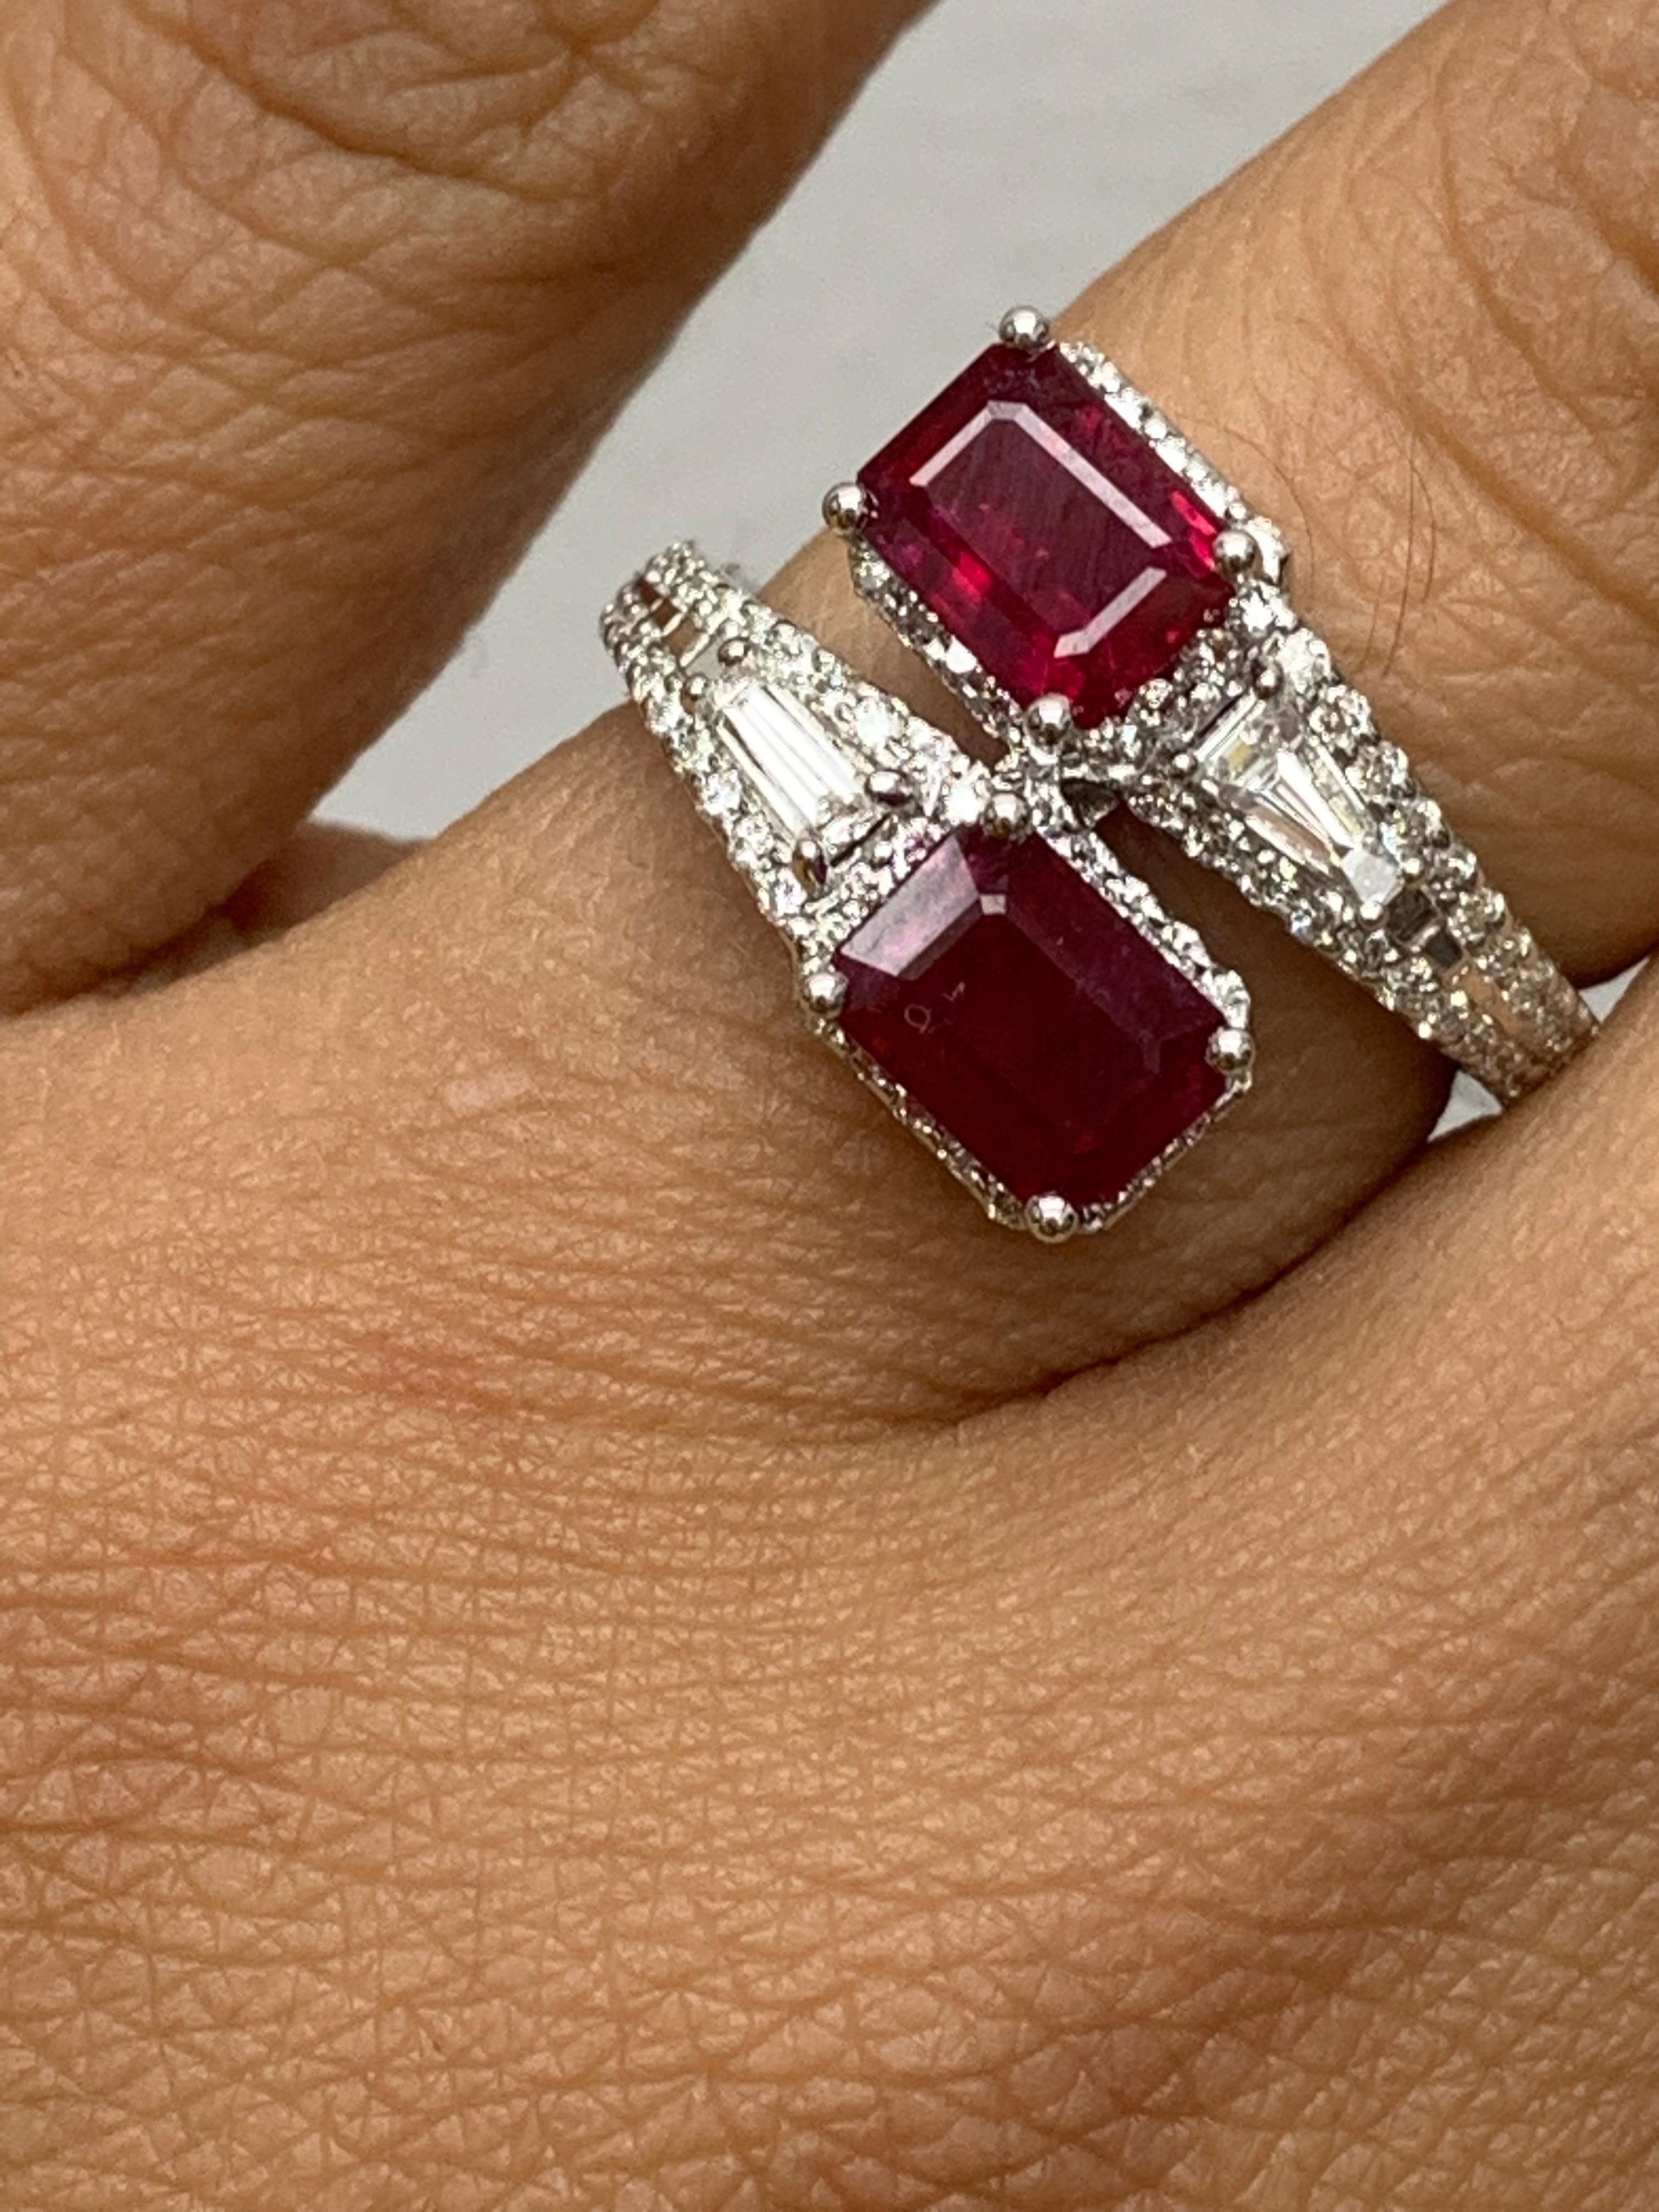 emerald cut ruby engagement ring